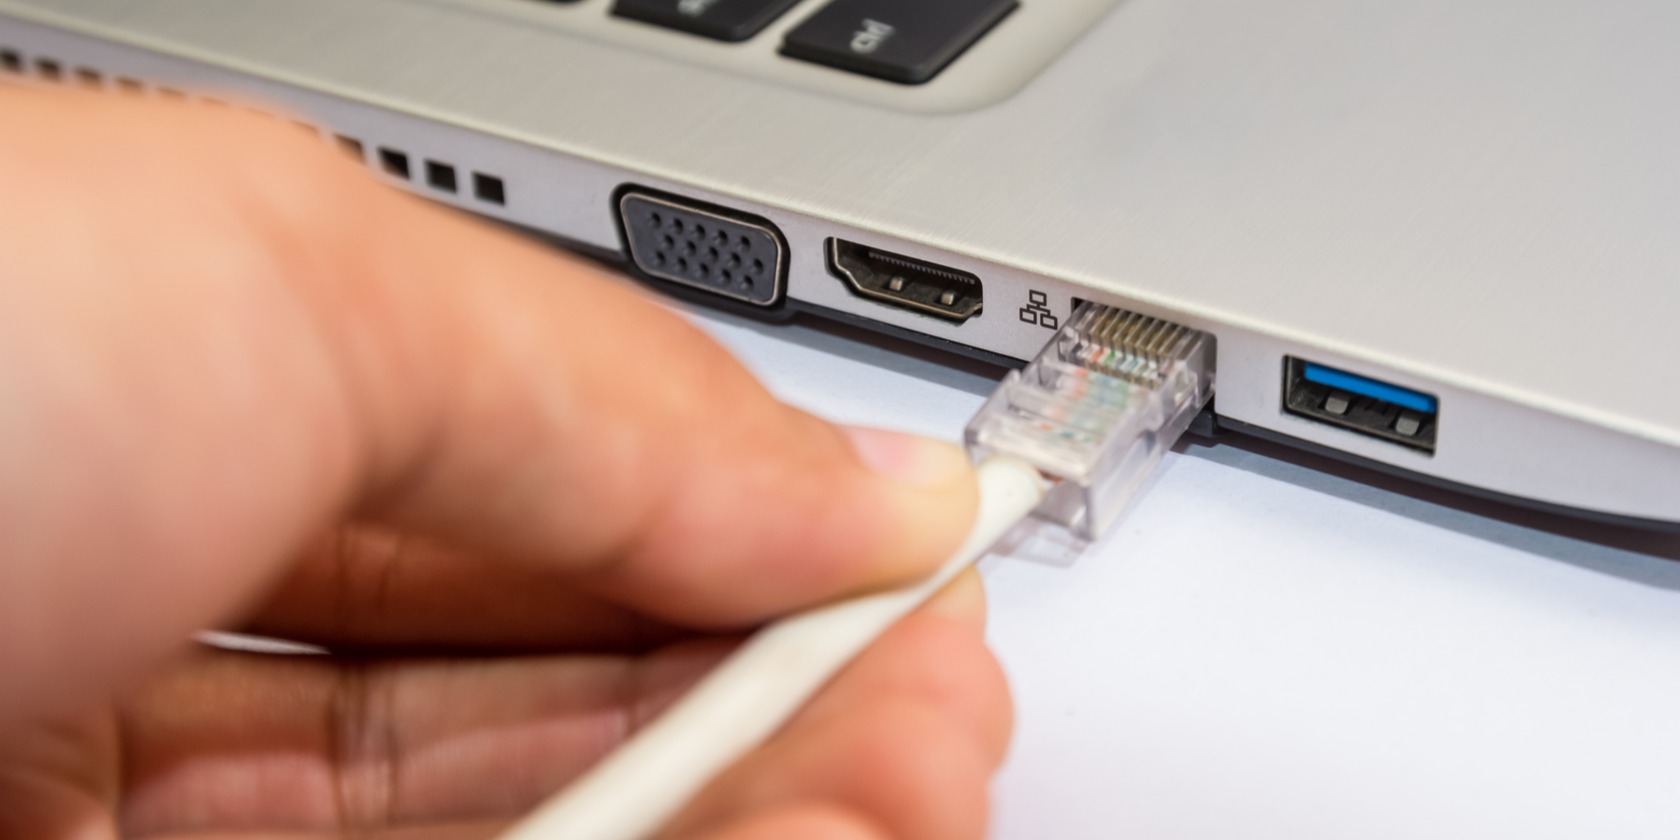 How To Connect An Ethernet Cable To A Laptop